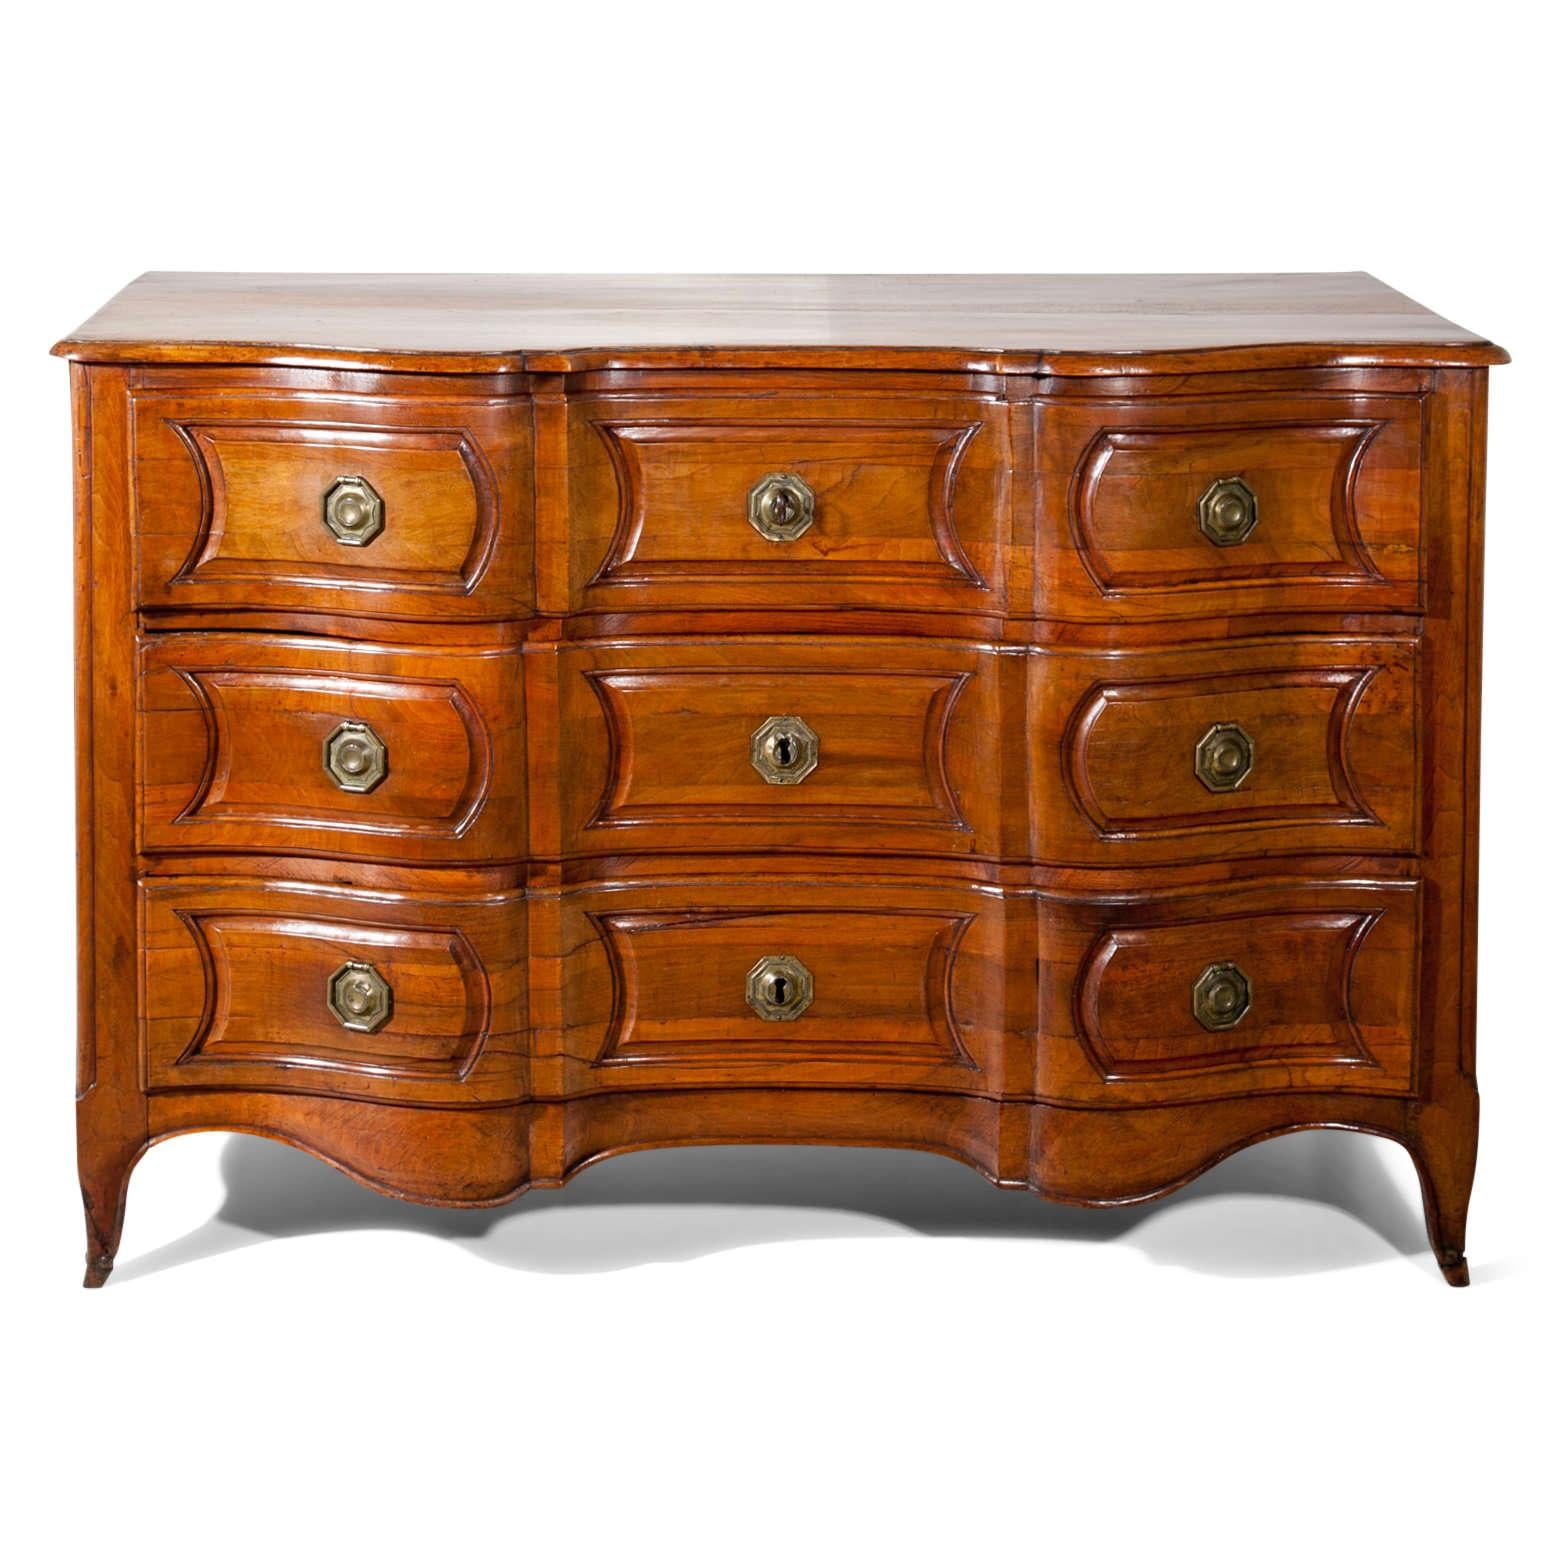 Three-drawered Baroque chest of drawers out of solid walnut. The body shows a serpentine front and a very beautiful patina.